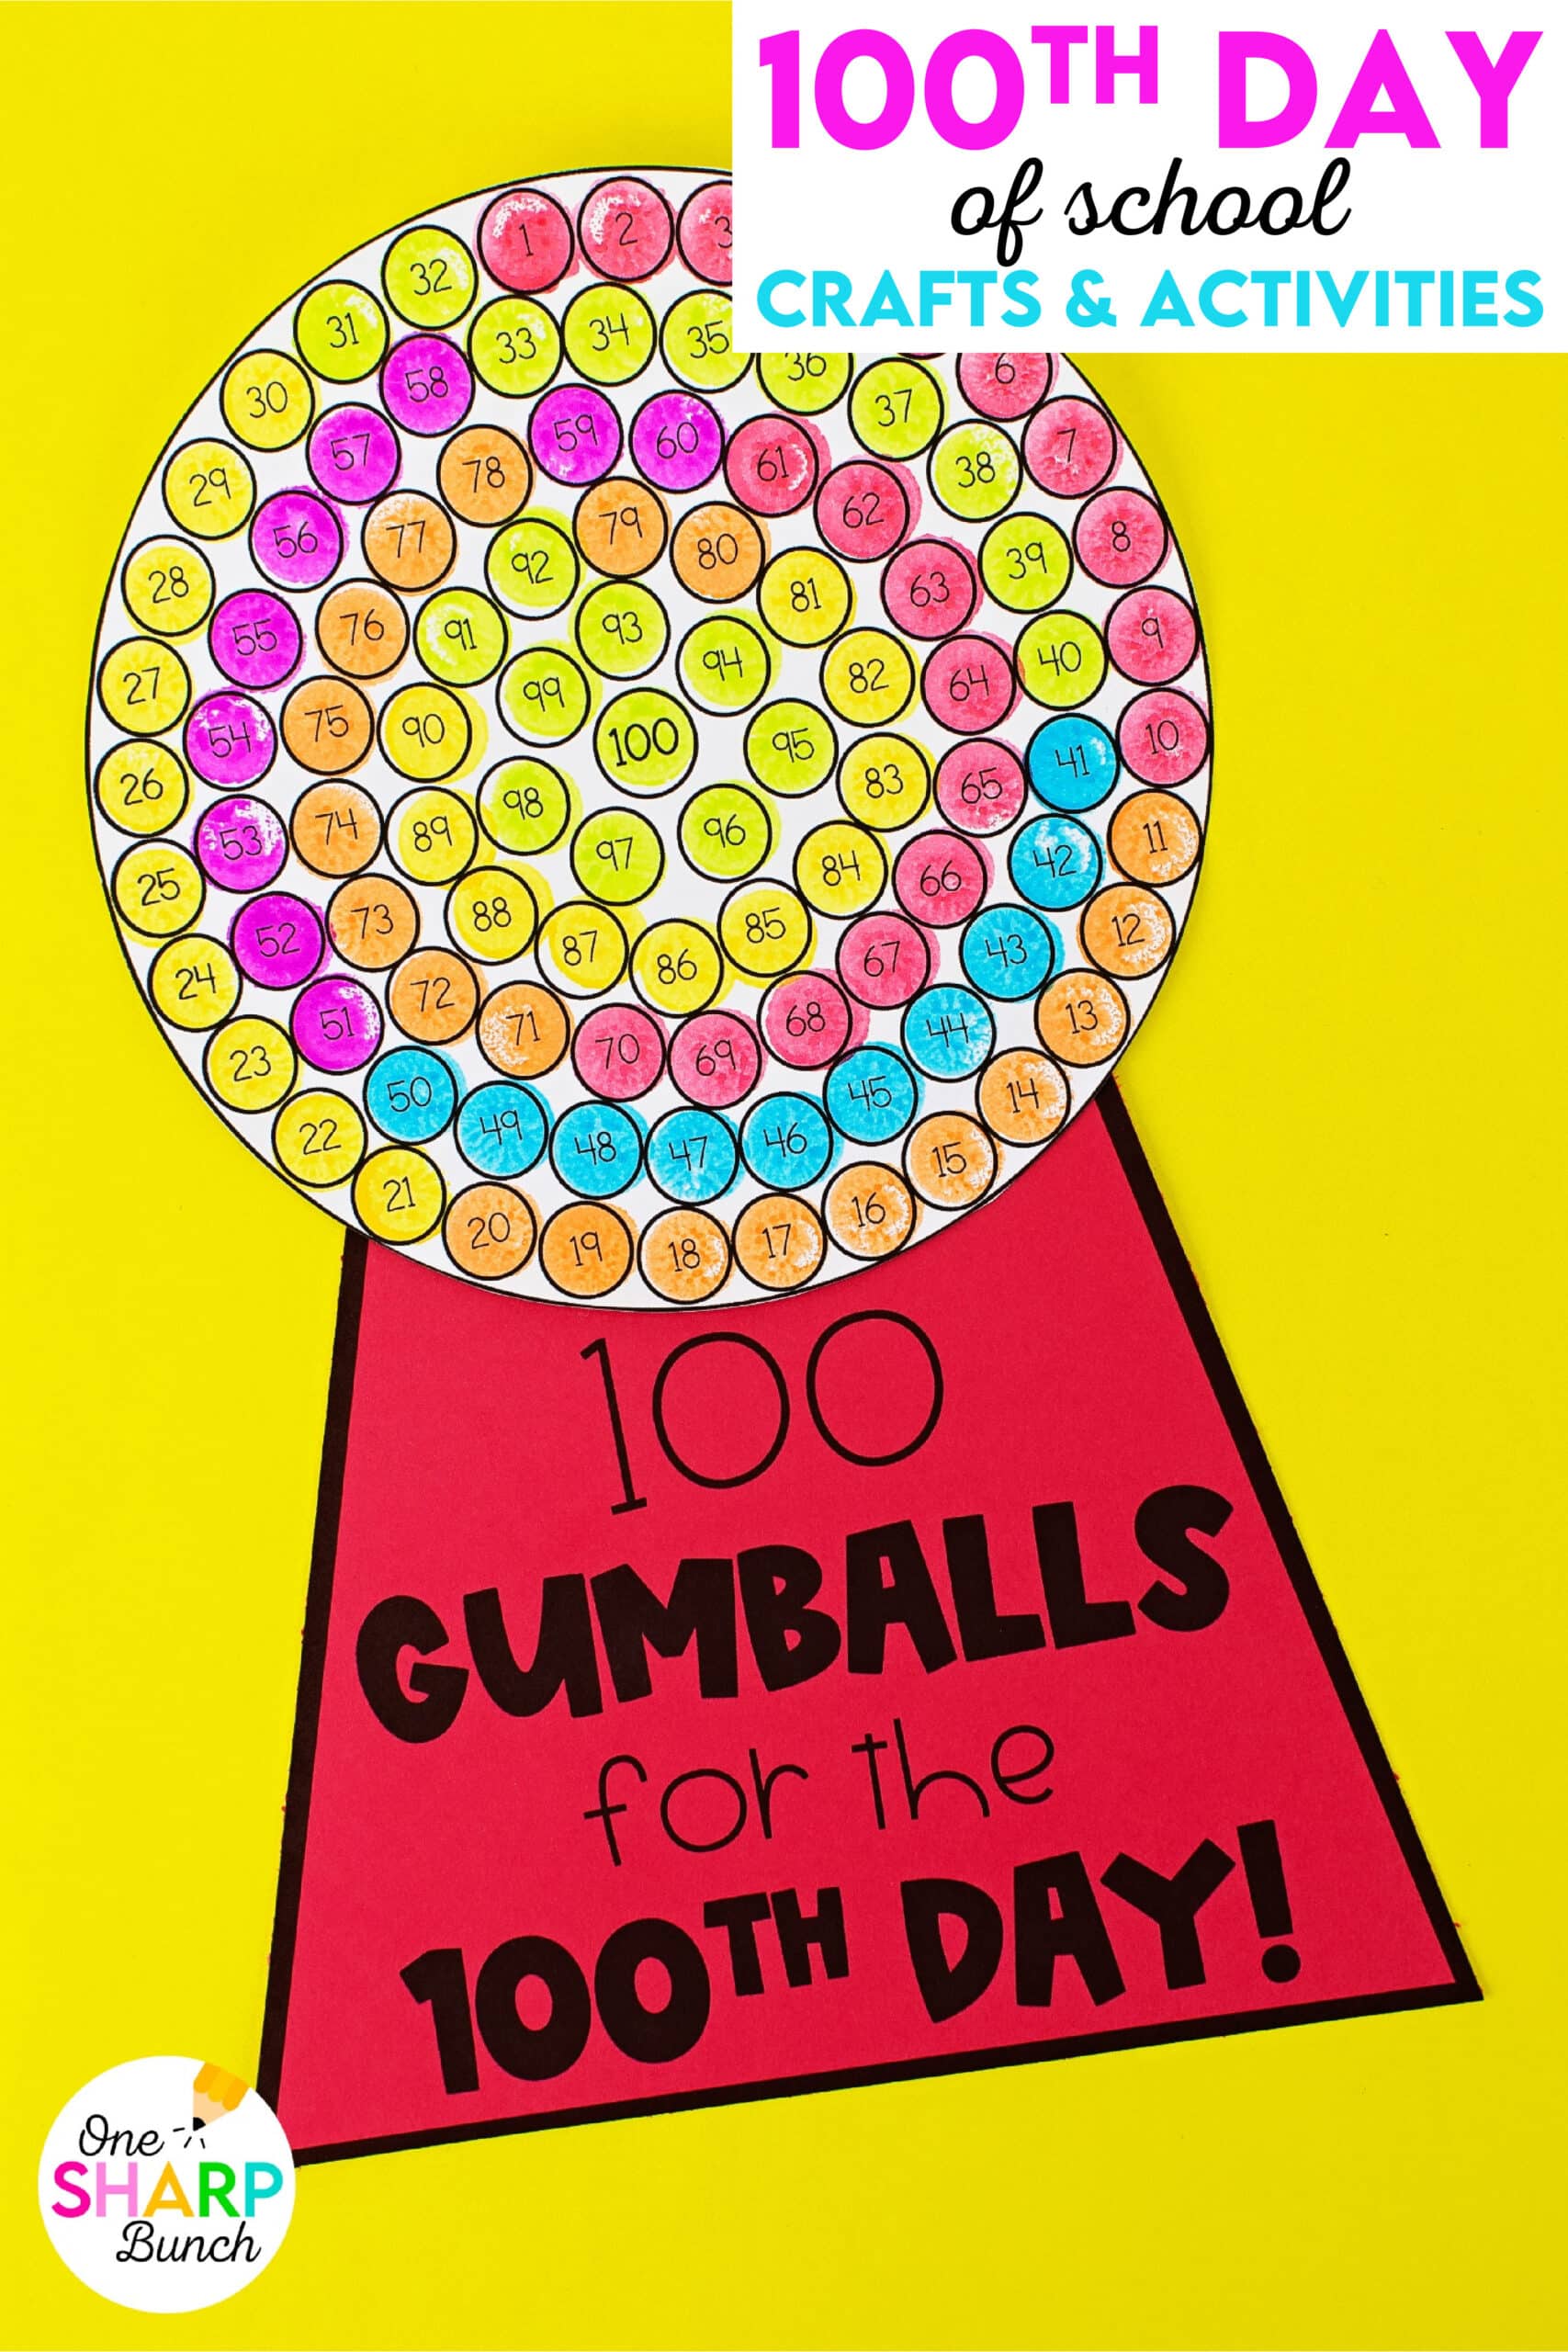 ​​Celebrate the 100th Day of School with these adorable and easy-to-assemble 100th Day crafts for kindergarten and first grade! These 100th Day of School crafts are perfect for your 100th day stations. Students get to create a 100th day gumball machine and practice counting to 100. They also get to make a 100th day crown, as well as complete a 100th day directed drawing activity. There is also an adorable 100th day craft that is perfect for your 100th day of school bulletin board!